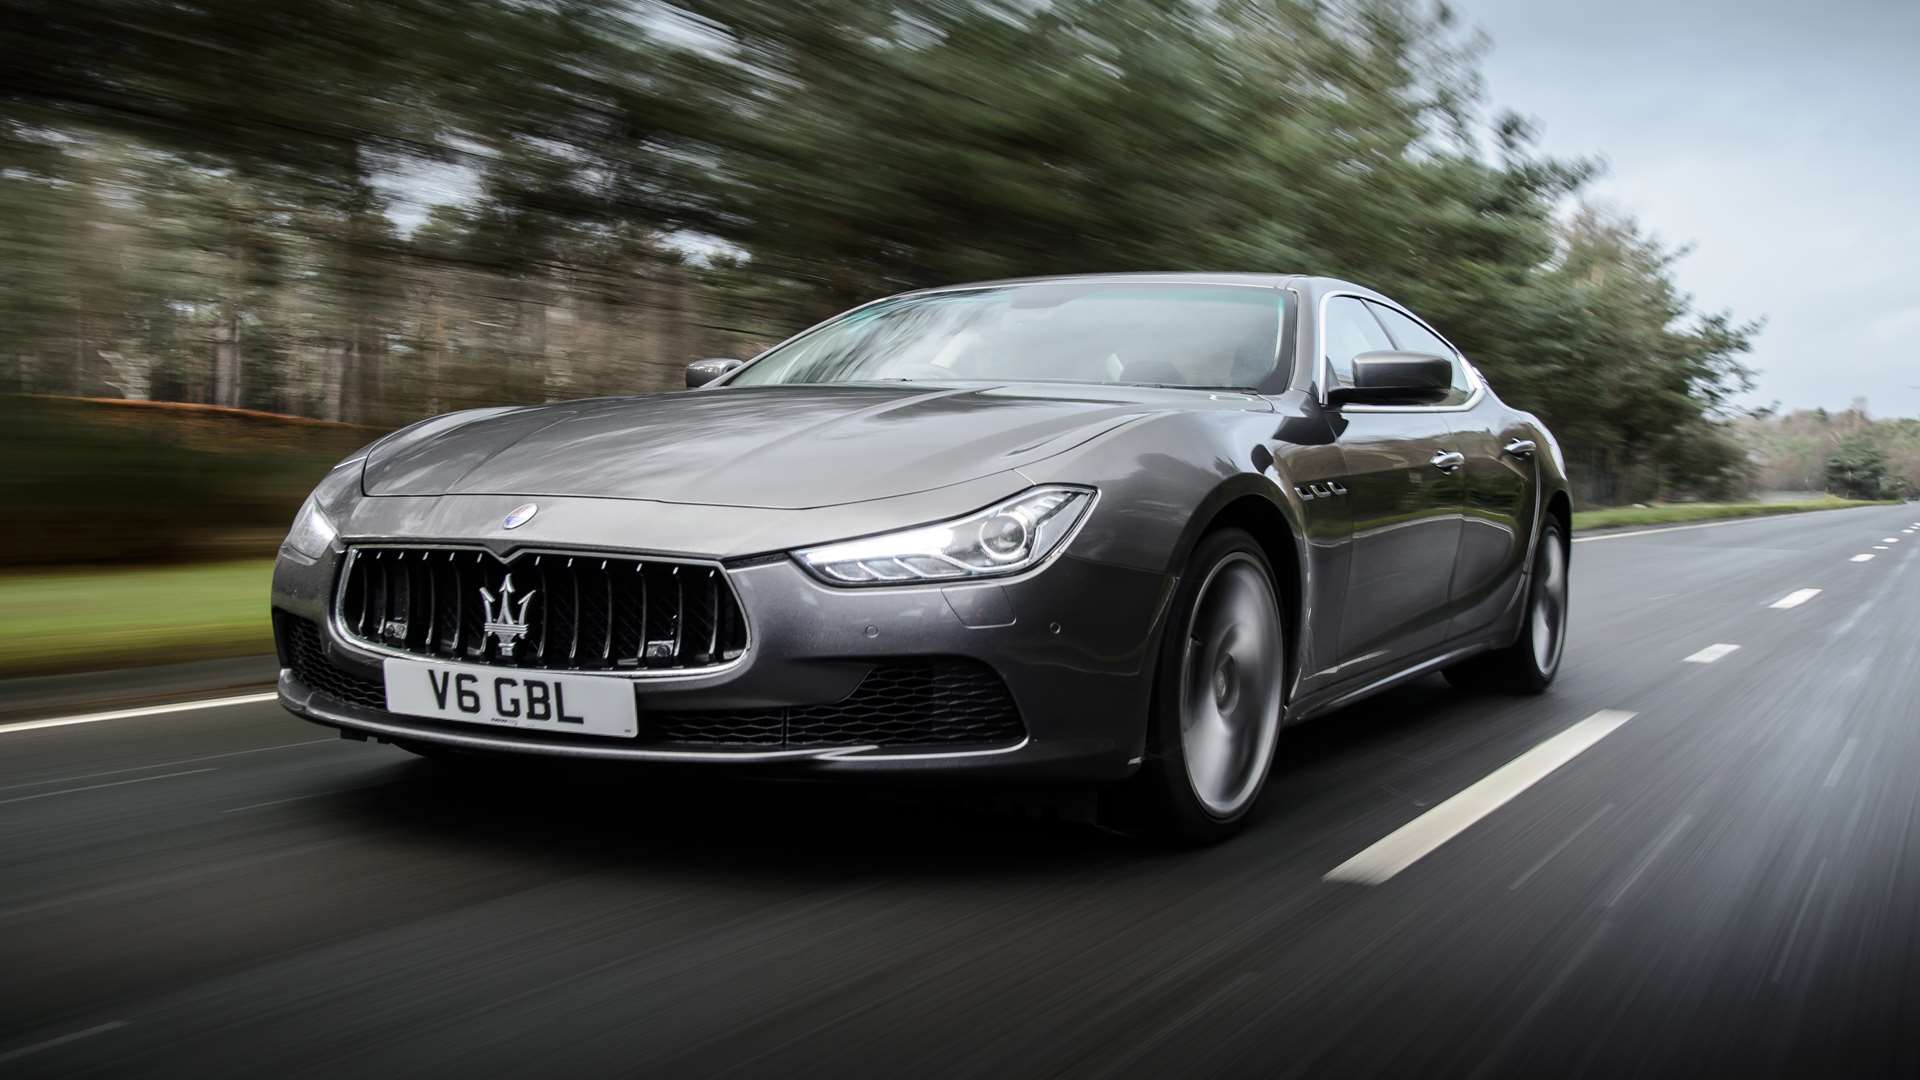 The Ghibli shares its face with the gorgeous GranTurismo